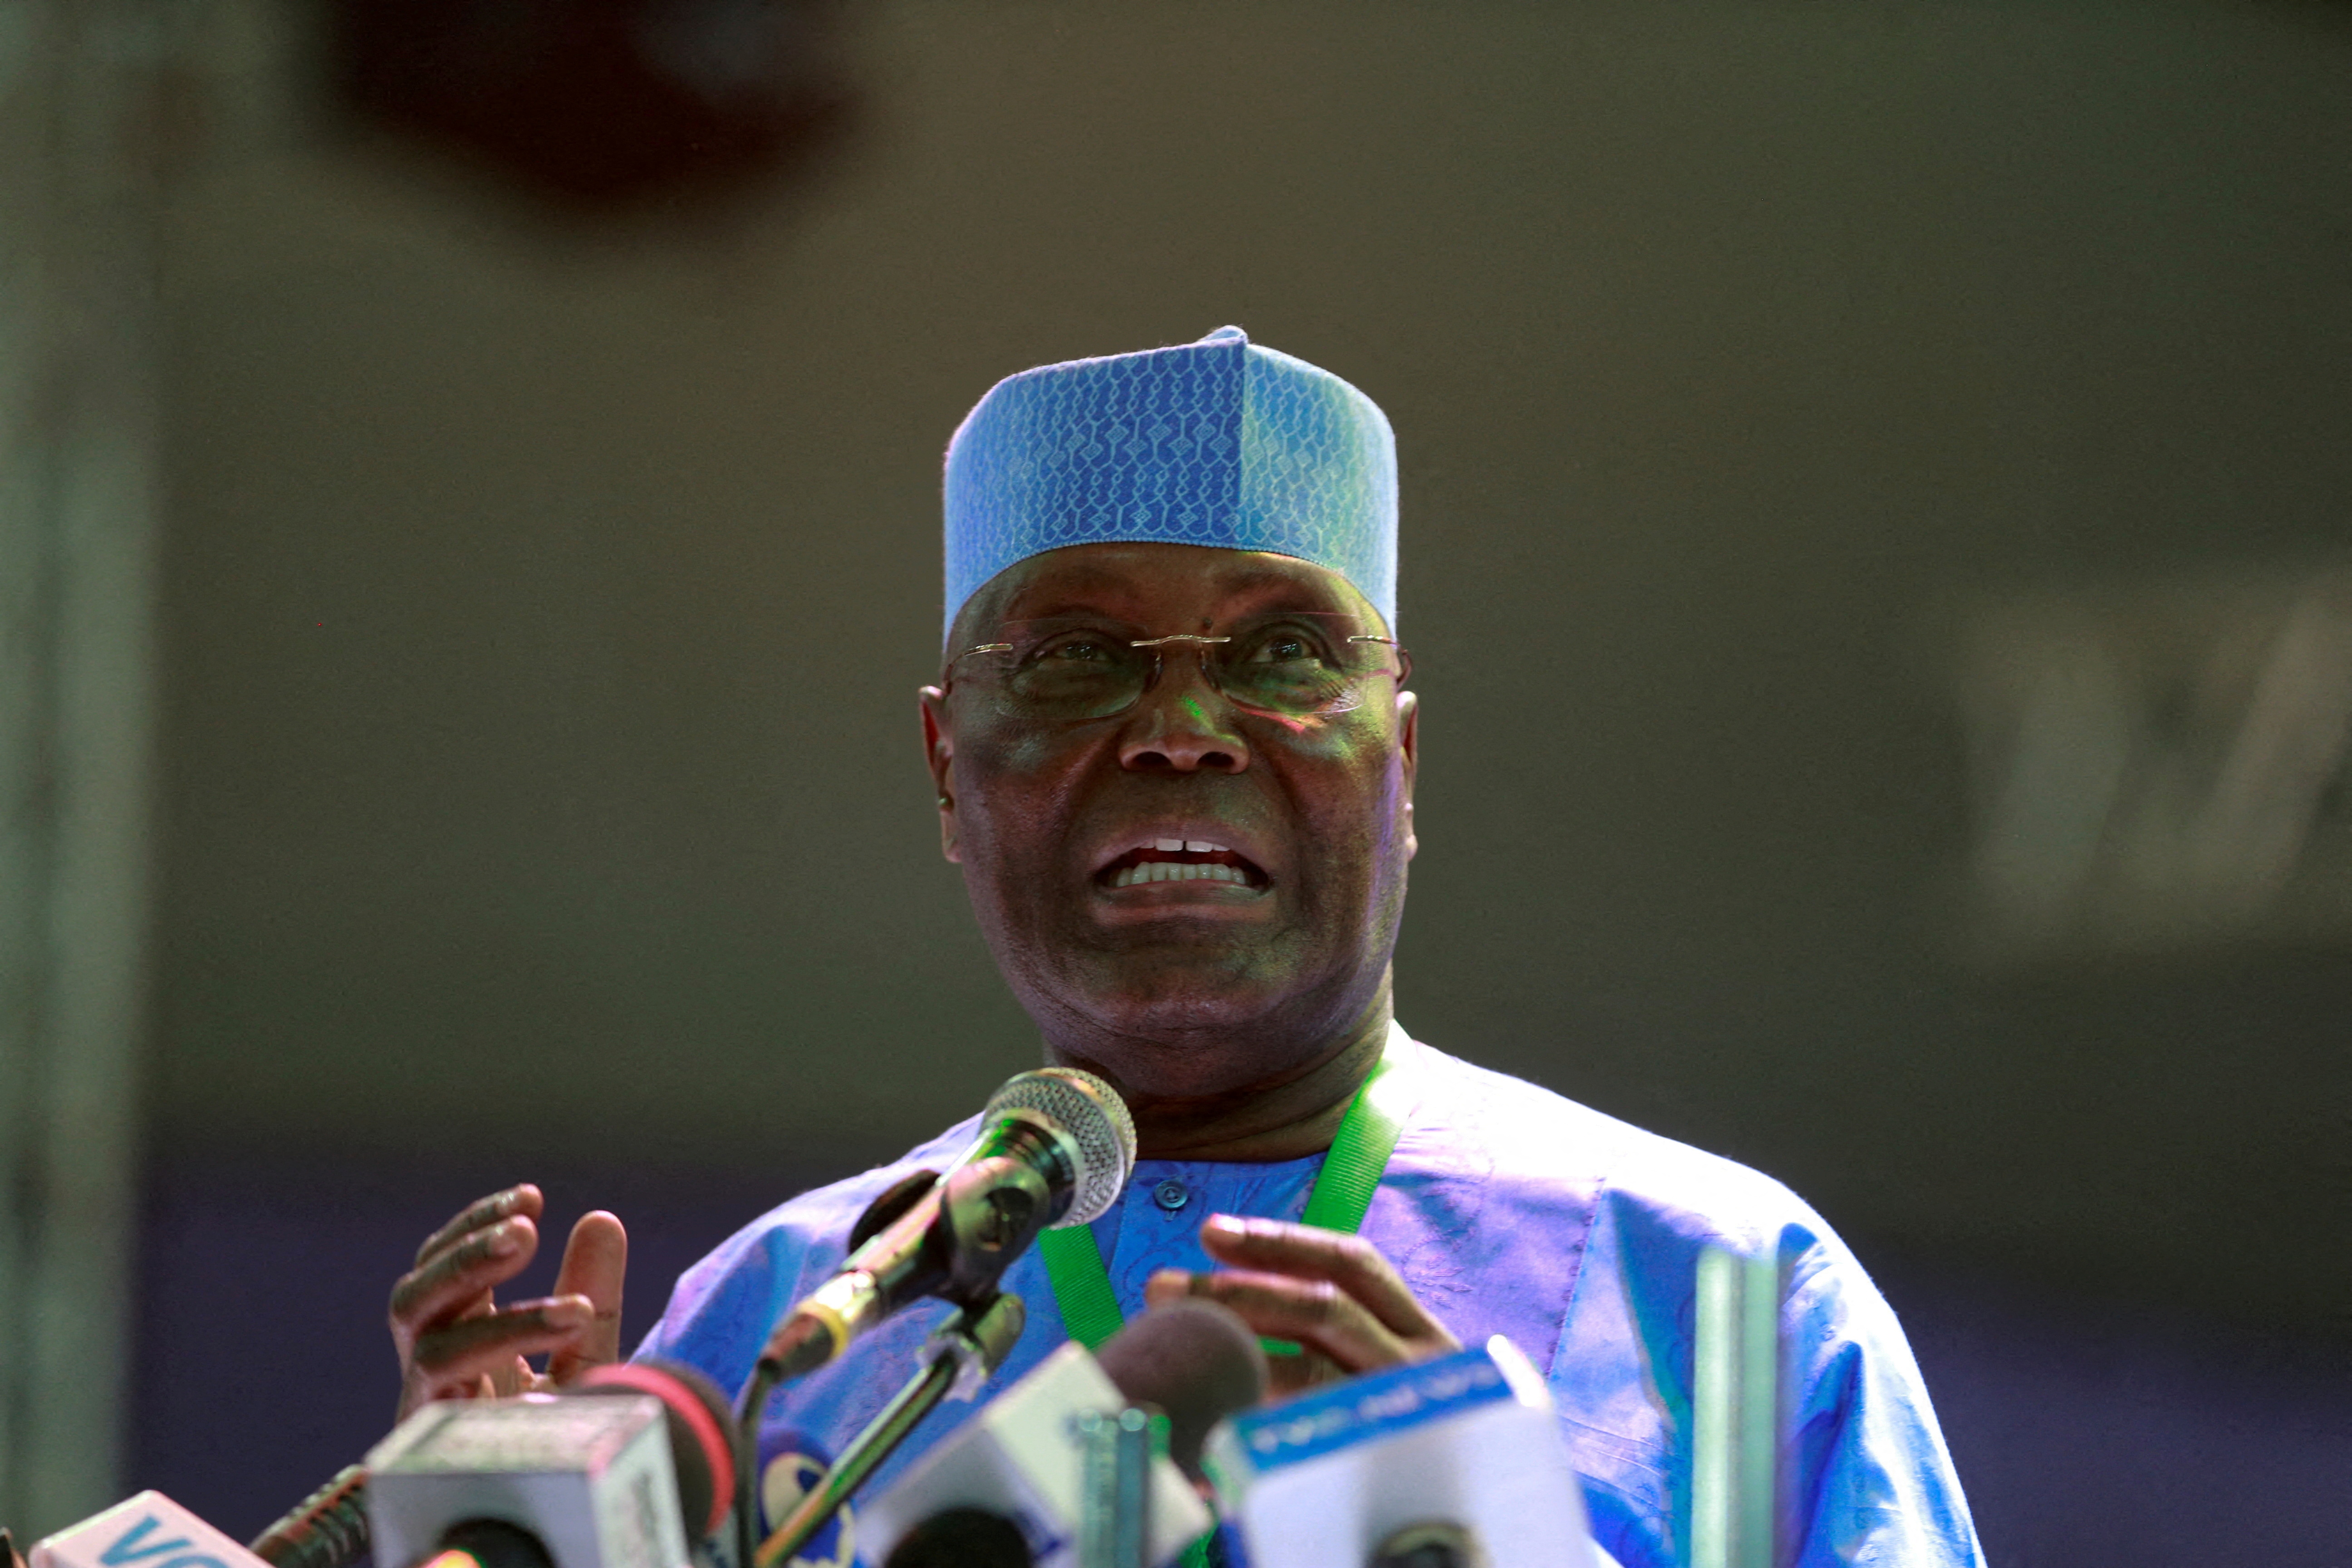 Former Nigeria Vice President Atiku Abubakar adresses the People's Democratic Party delegates during the Special convention in Abuja